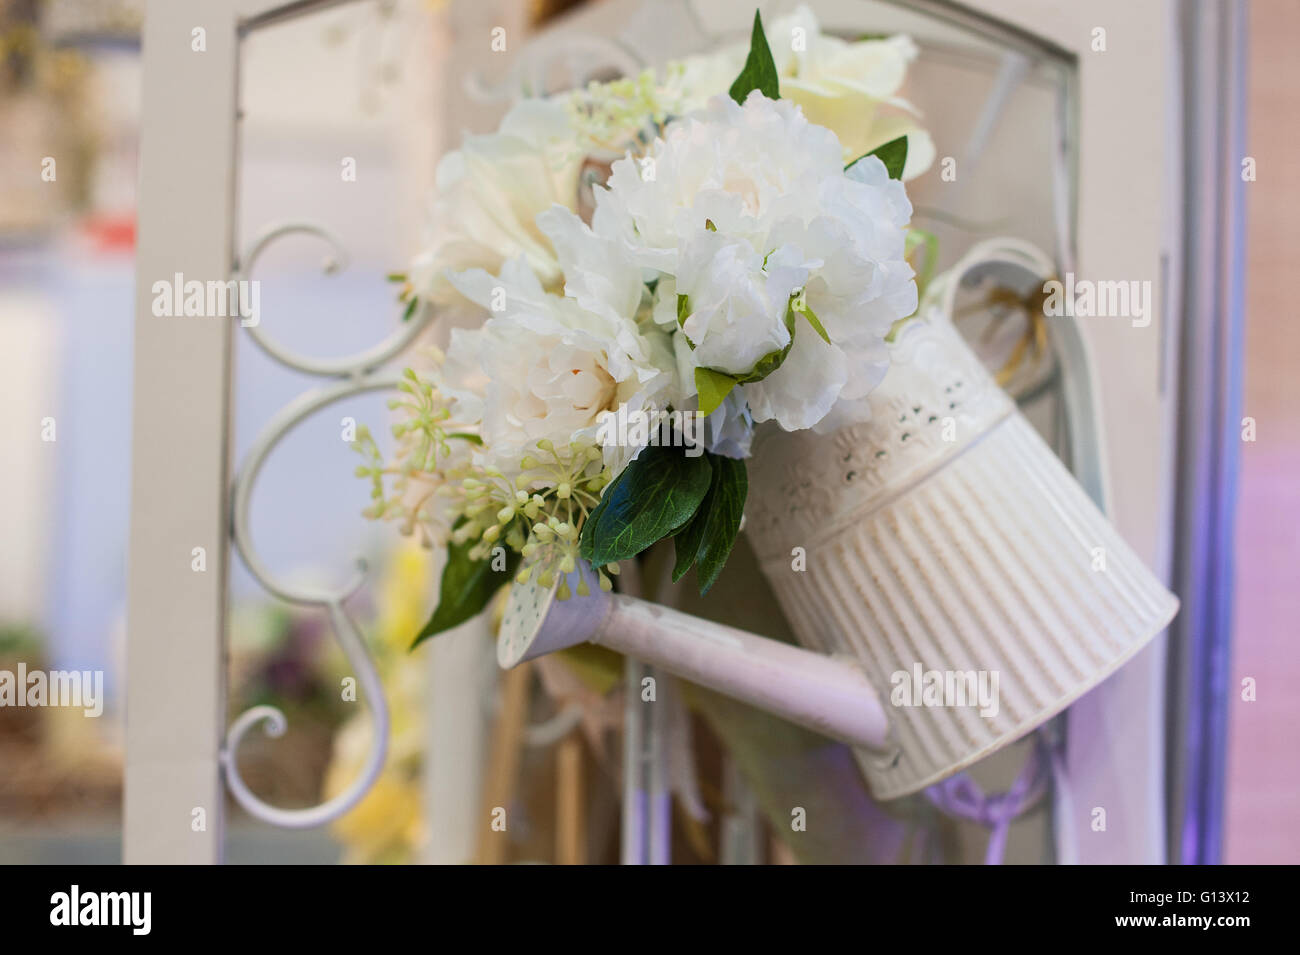 Beautiful decor of flowers for the wedding photo shoot Stock Photo